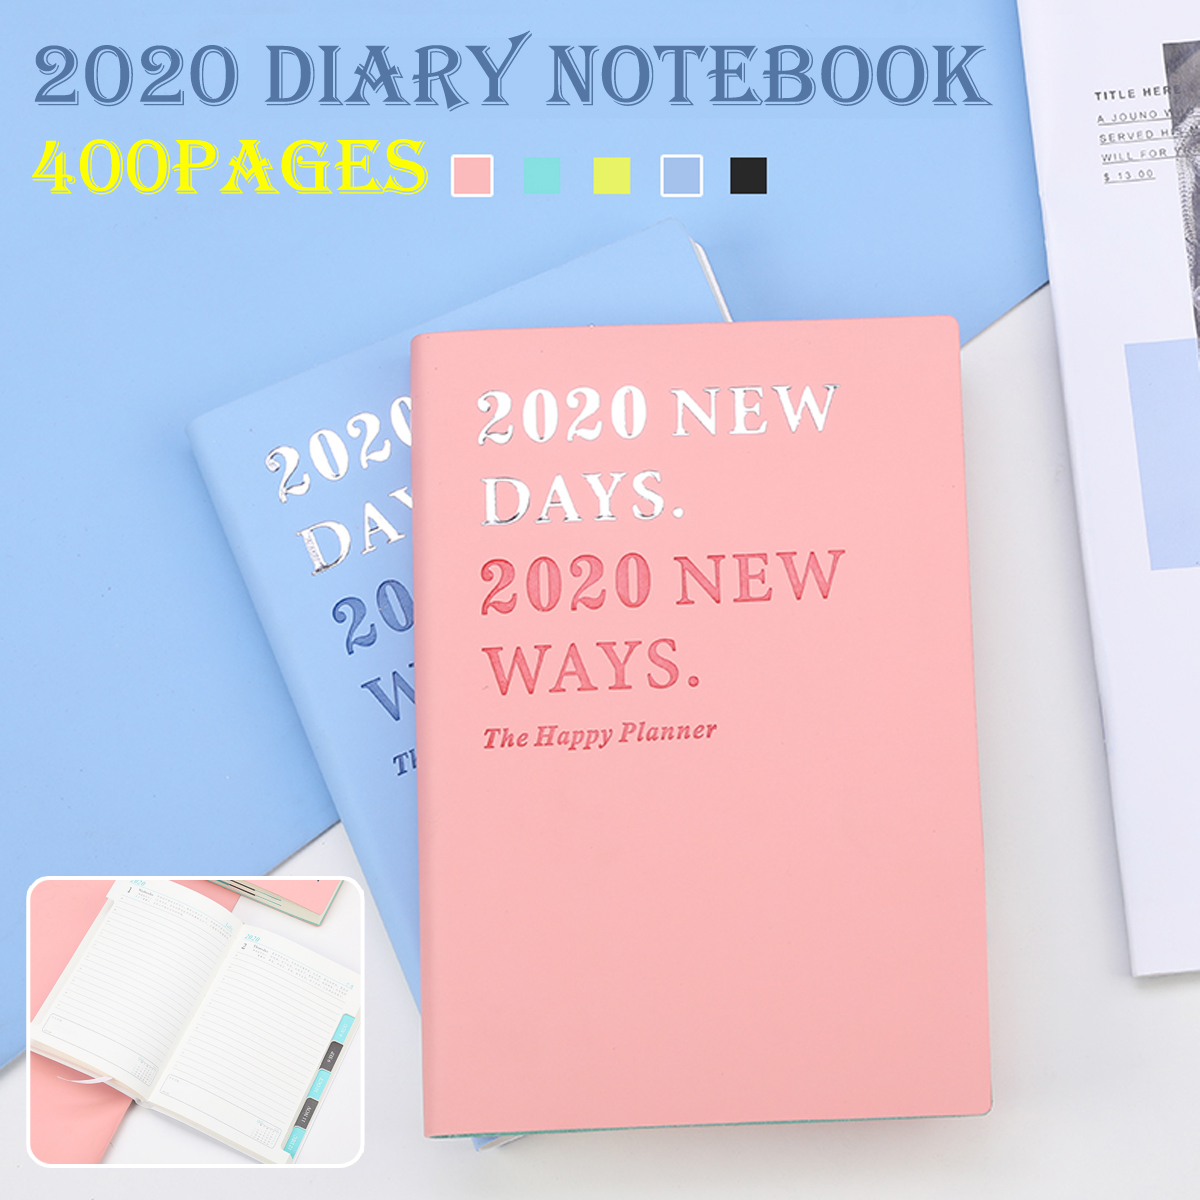 A5-Plan-Diary-Notebook-Journal-Weekly-Monthly-Notebook-Personal-Travel-Business-Notepad-Stationery-O-1740762-1